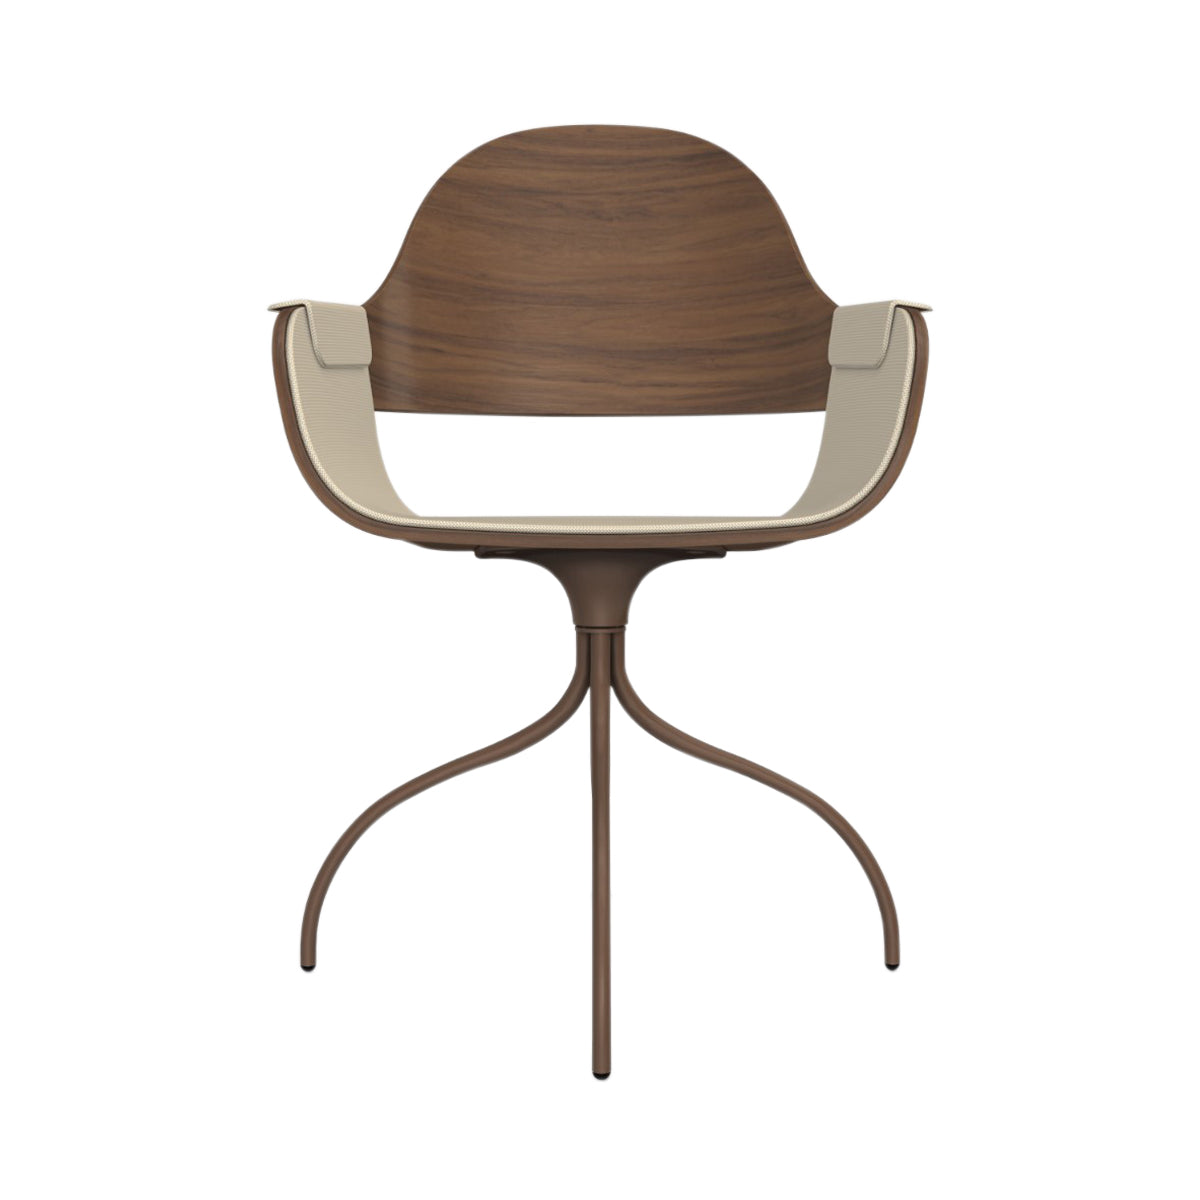 Showtime Nude Chair with Swivel Base: Interior Seat + Armrest Upholstered + Walnut + Pale Brown